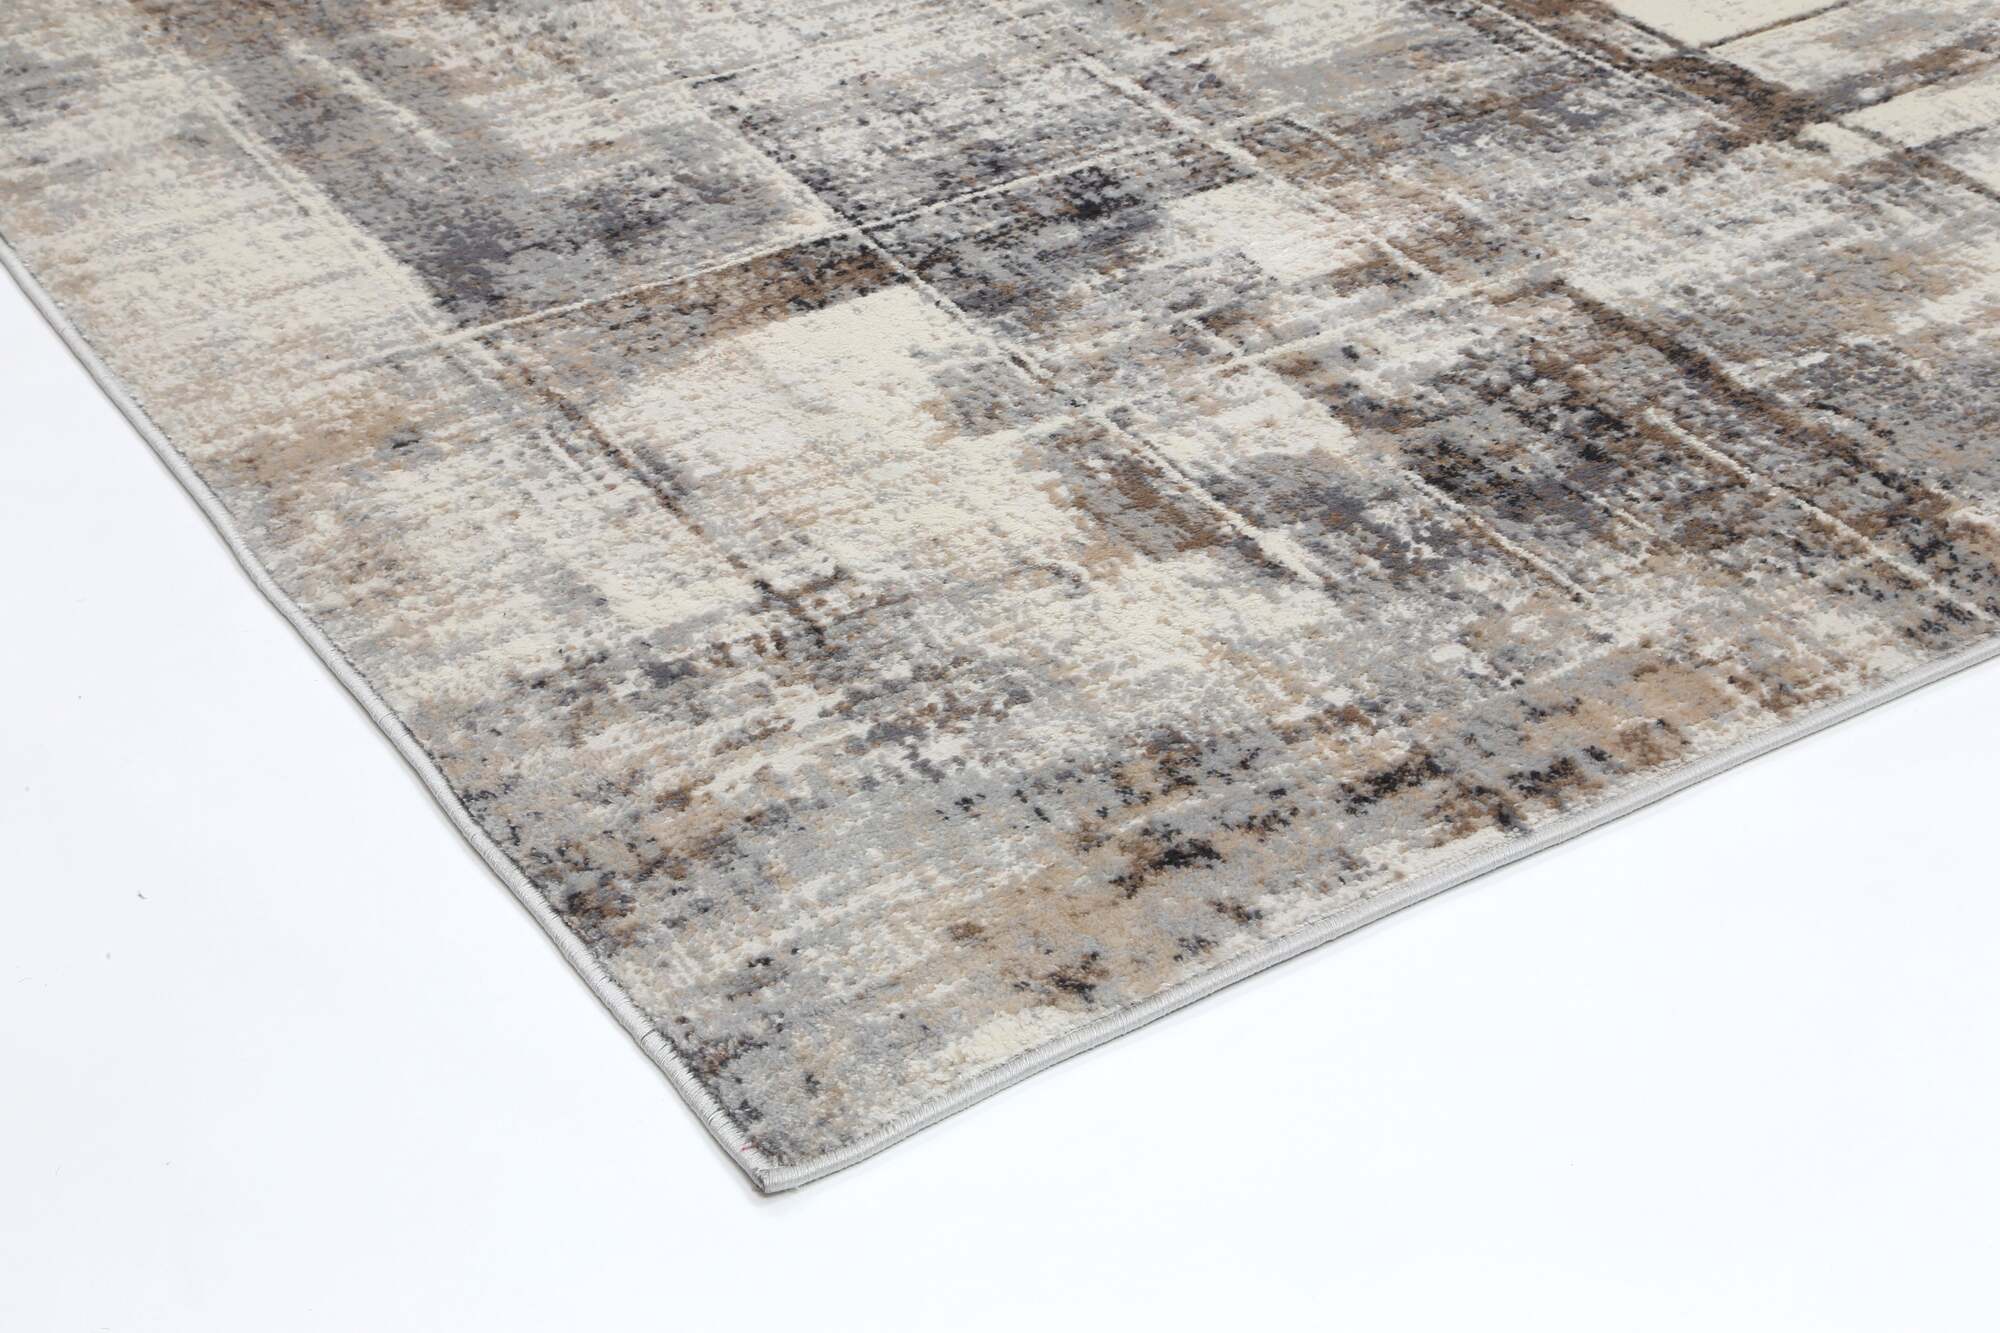 Elvis Transitional Abstract Rug